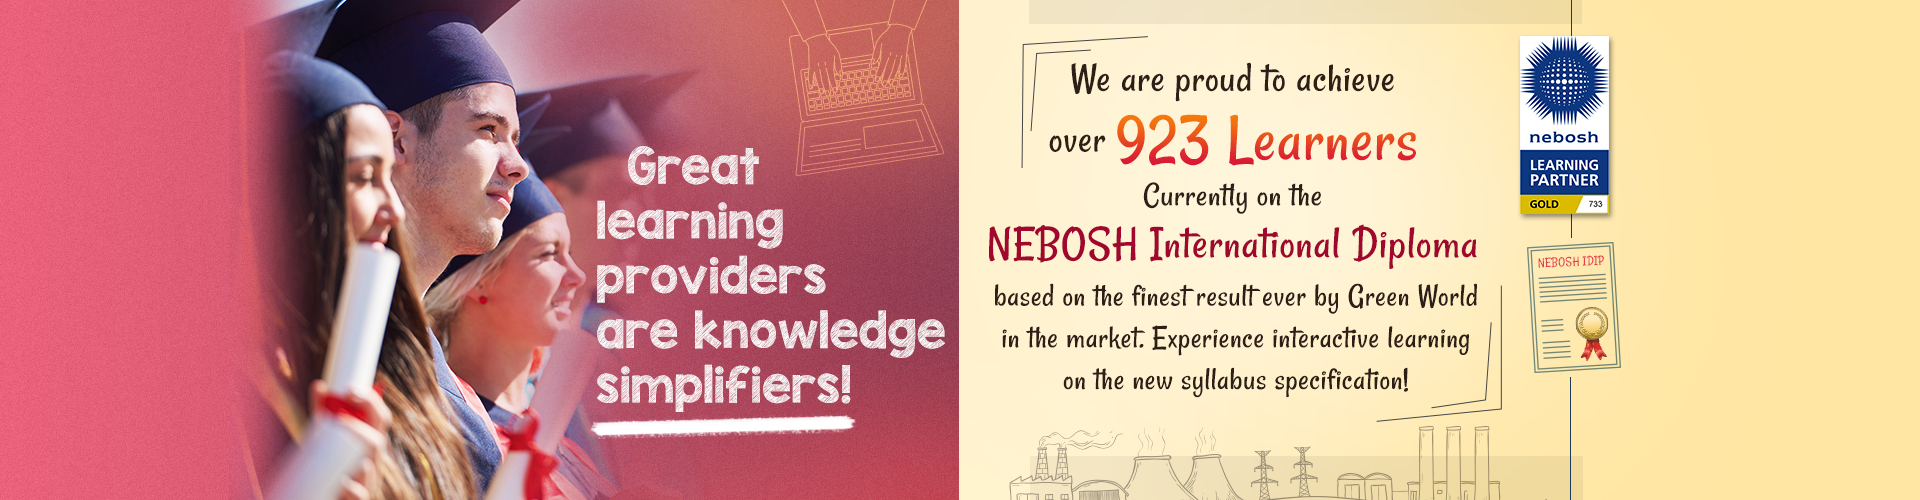 923-learners-Banner_NEBOSH_IDIP_Dec_2021_coin